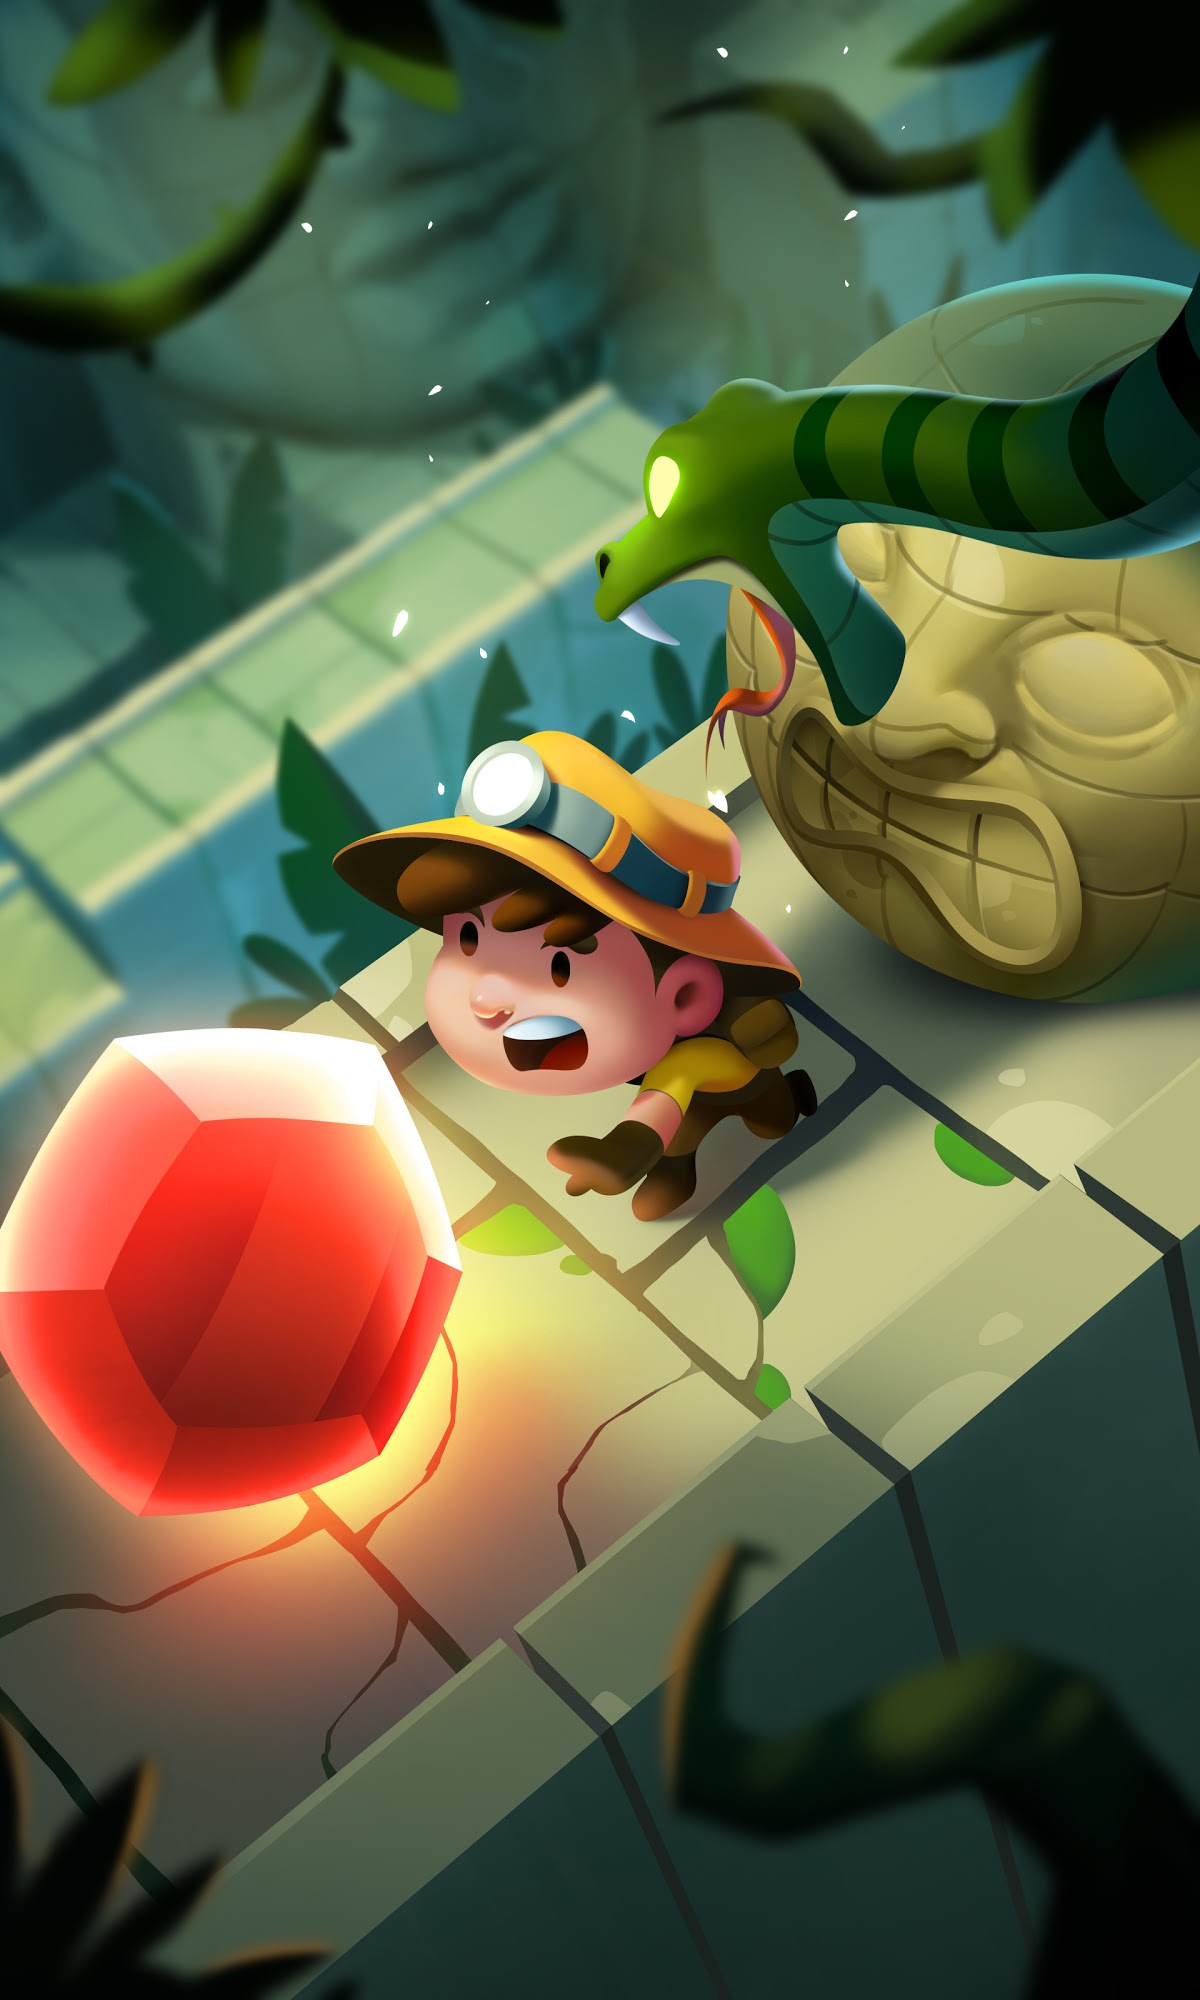 Diamond Quest 2: The Lost Temple for Android